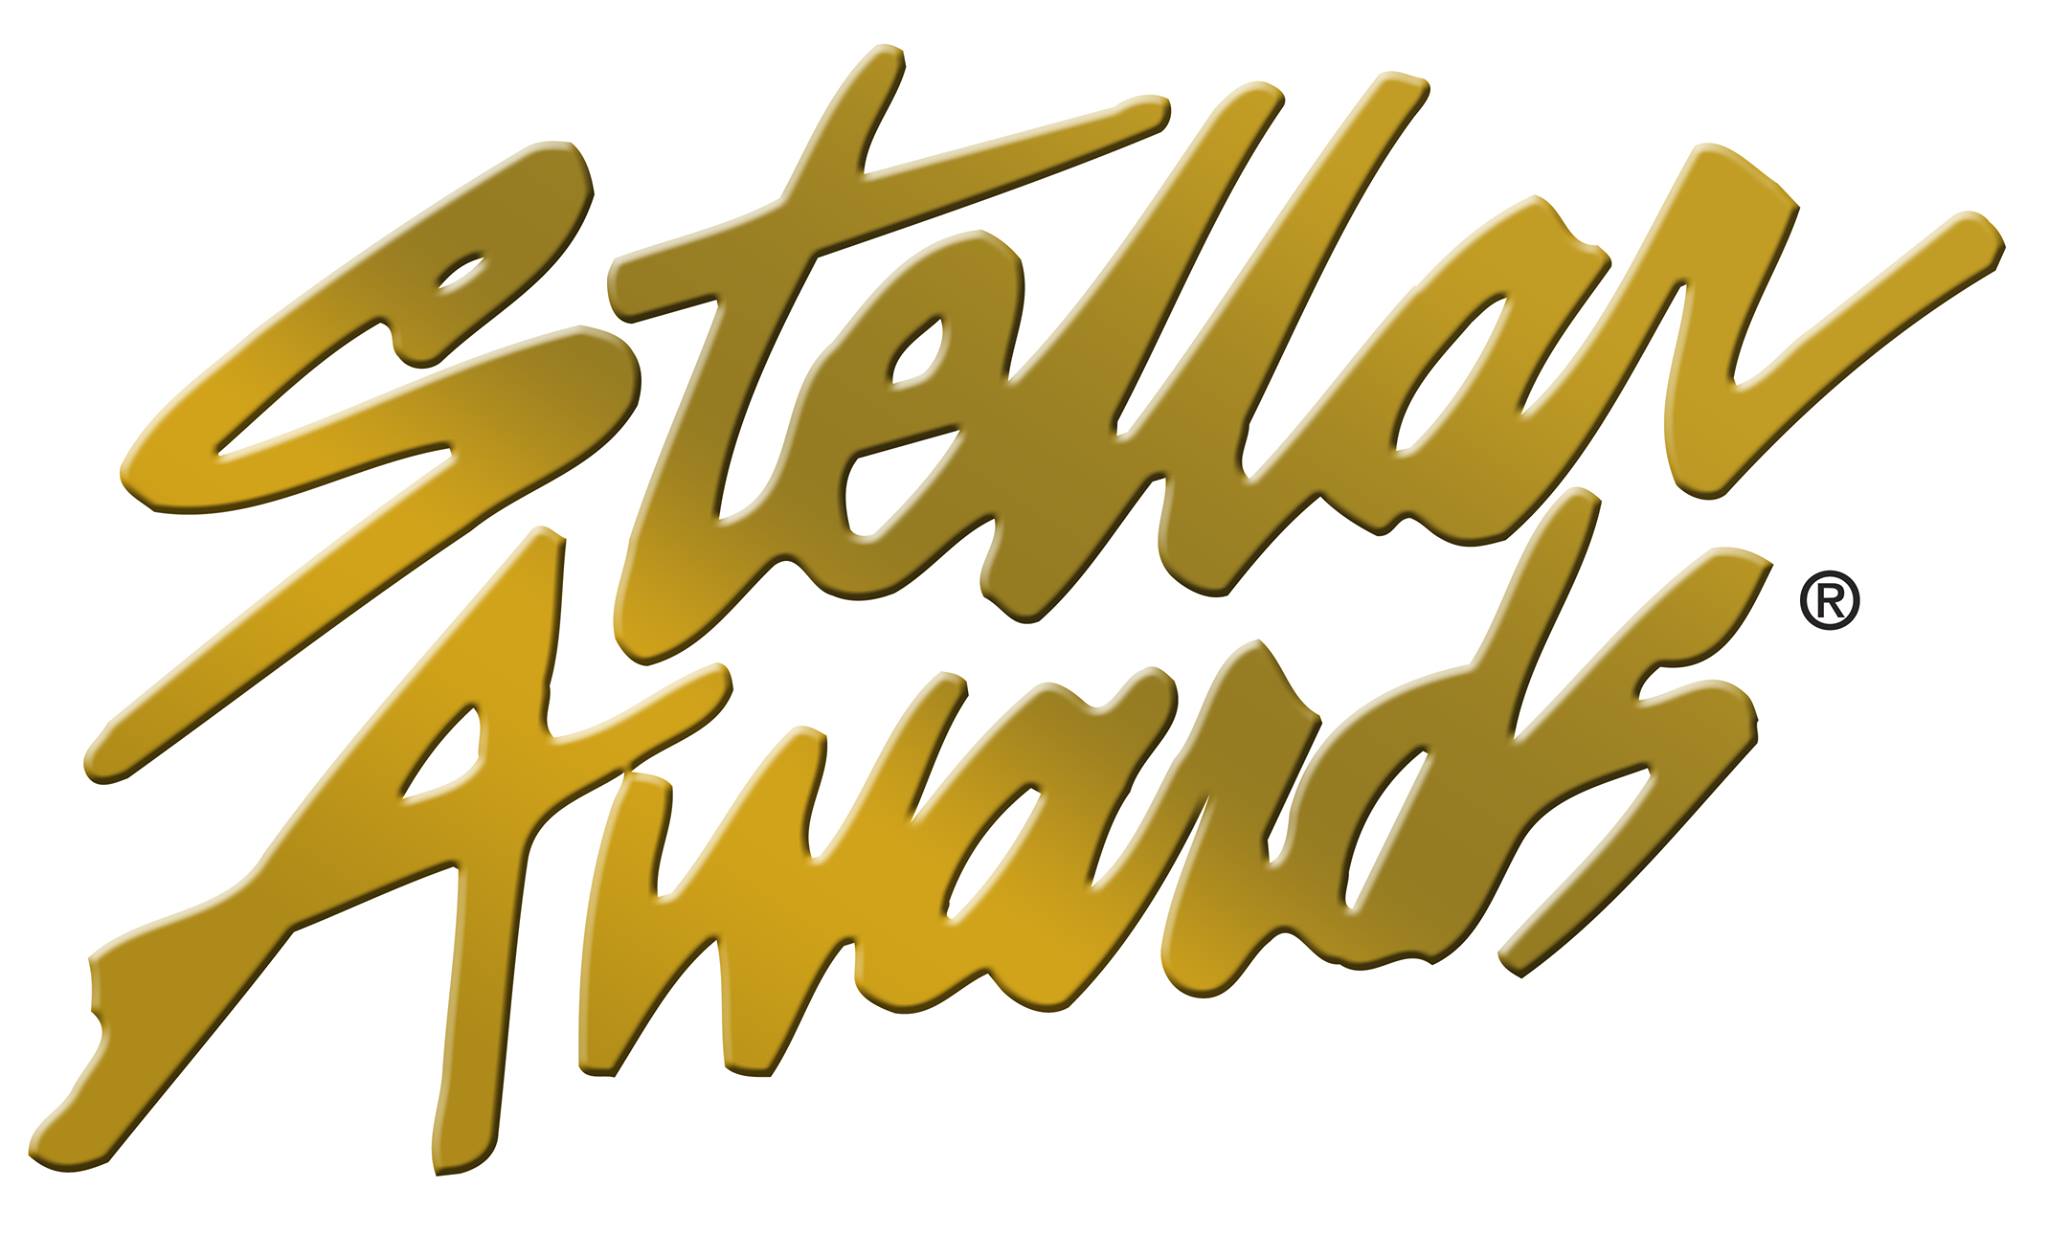 Events News 2018 Stellar Awards See The Full List Of Nominees, When